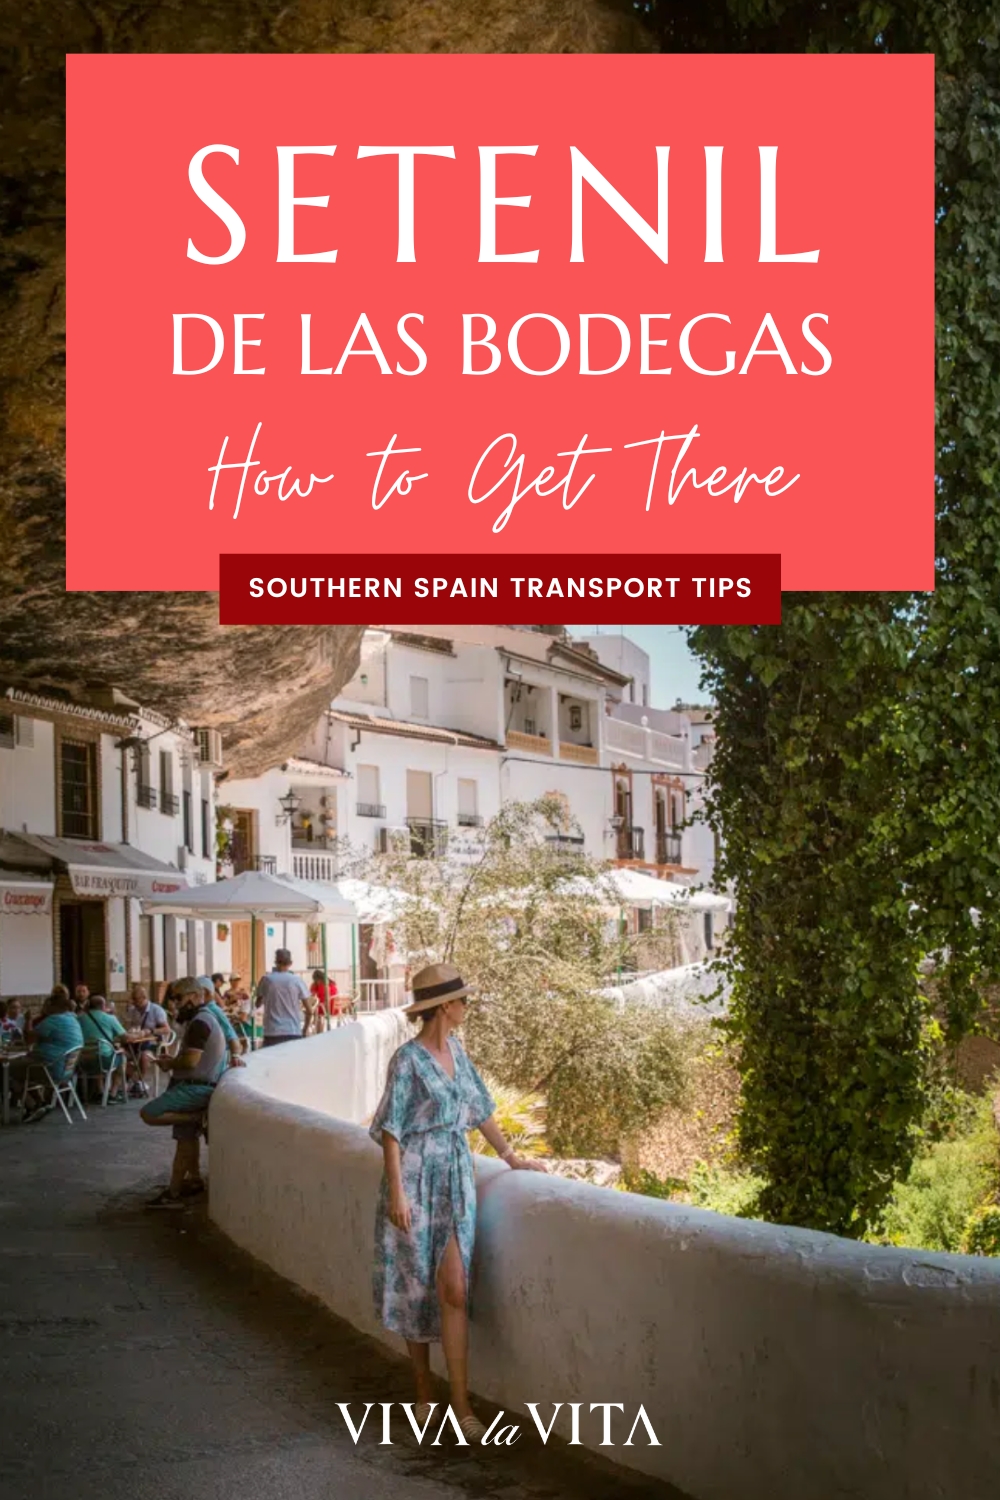 Pinterest image showing the streets of Setenil de las Bodegas in Southern Spain, with a headline: Setenil de las Bodegas how to get there